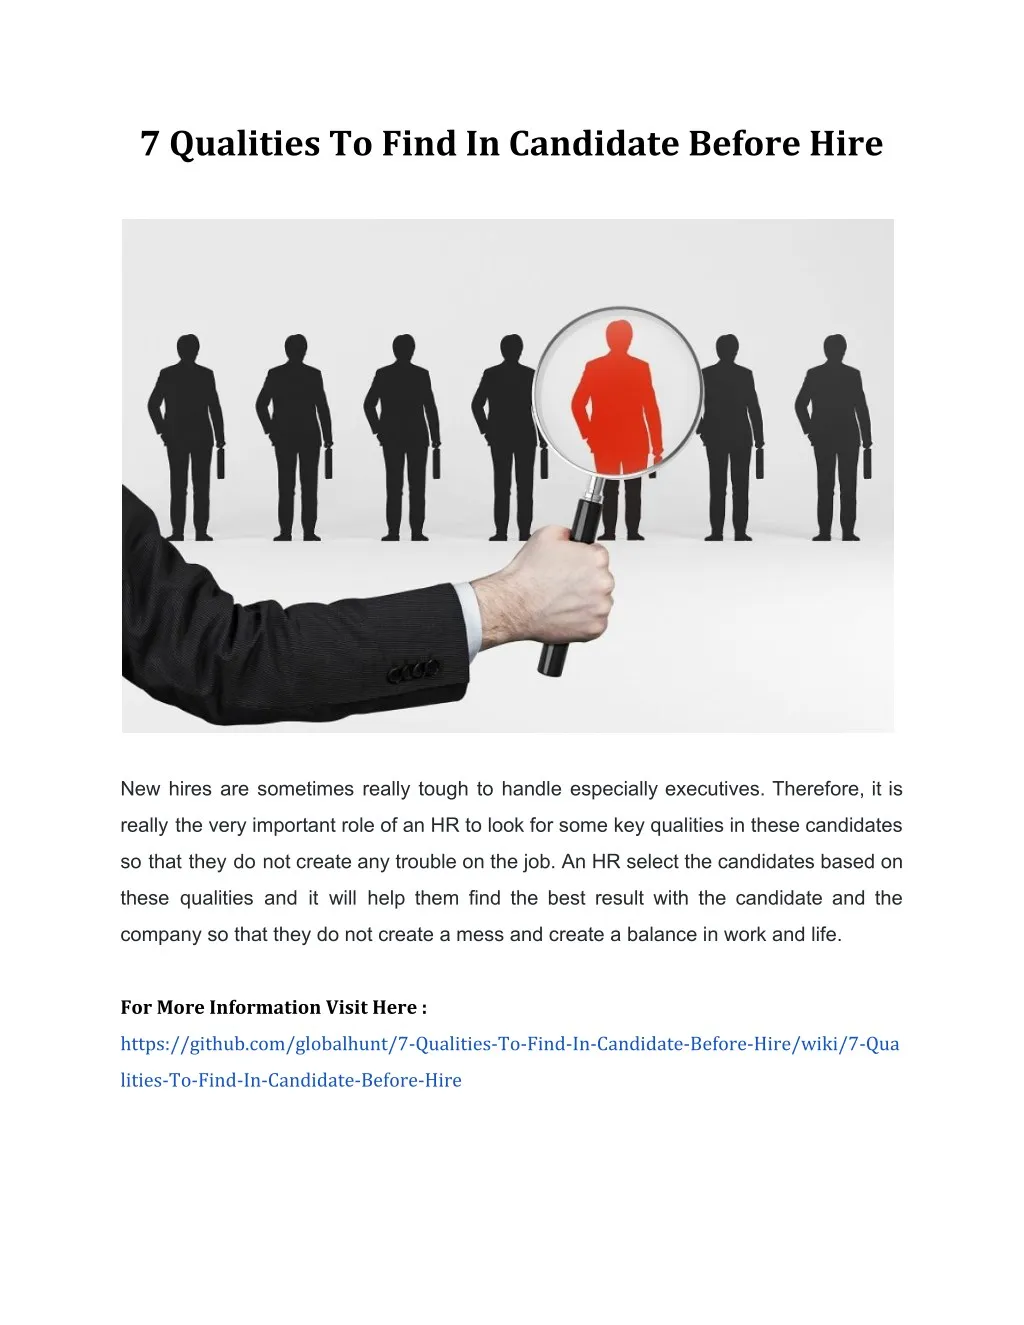 7 qualities to find in candidate before hire